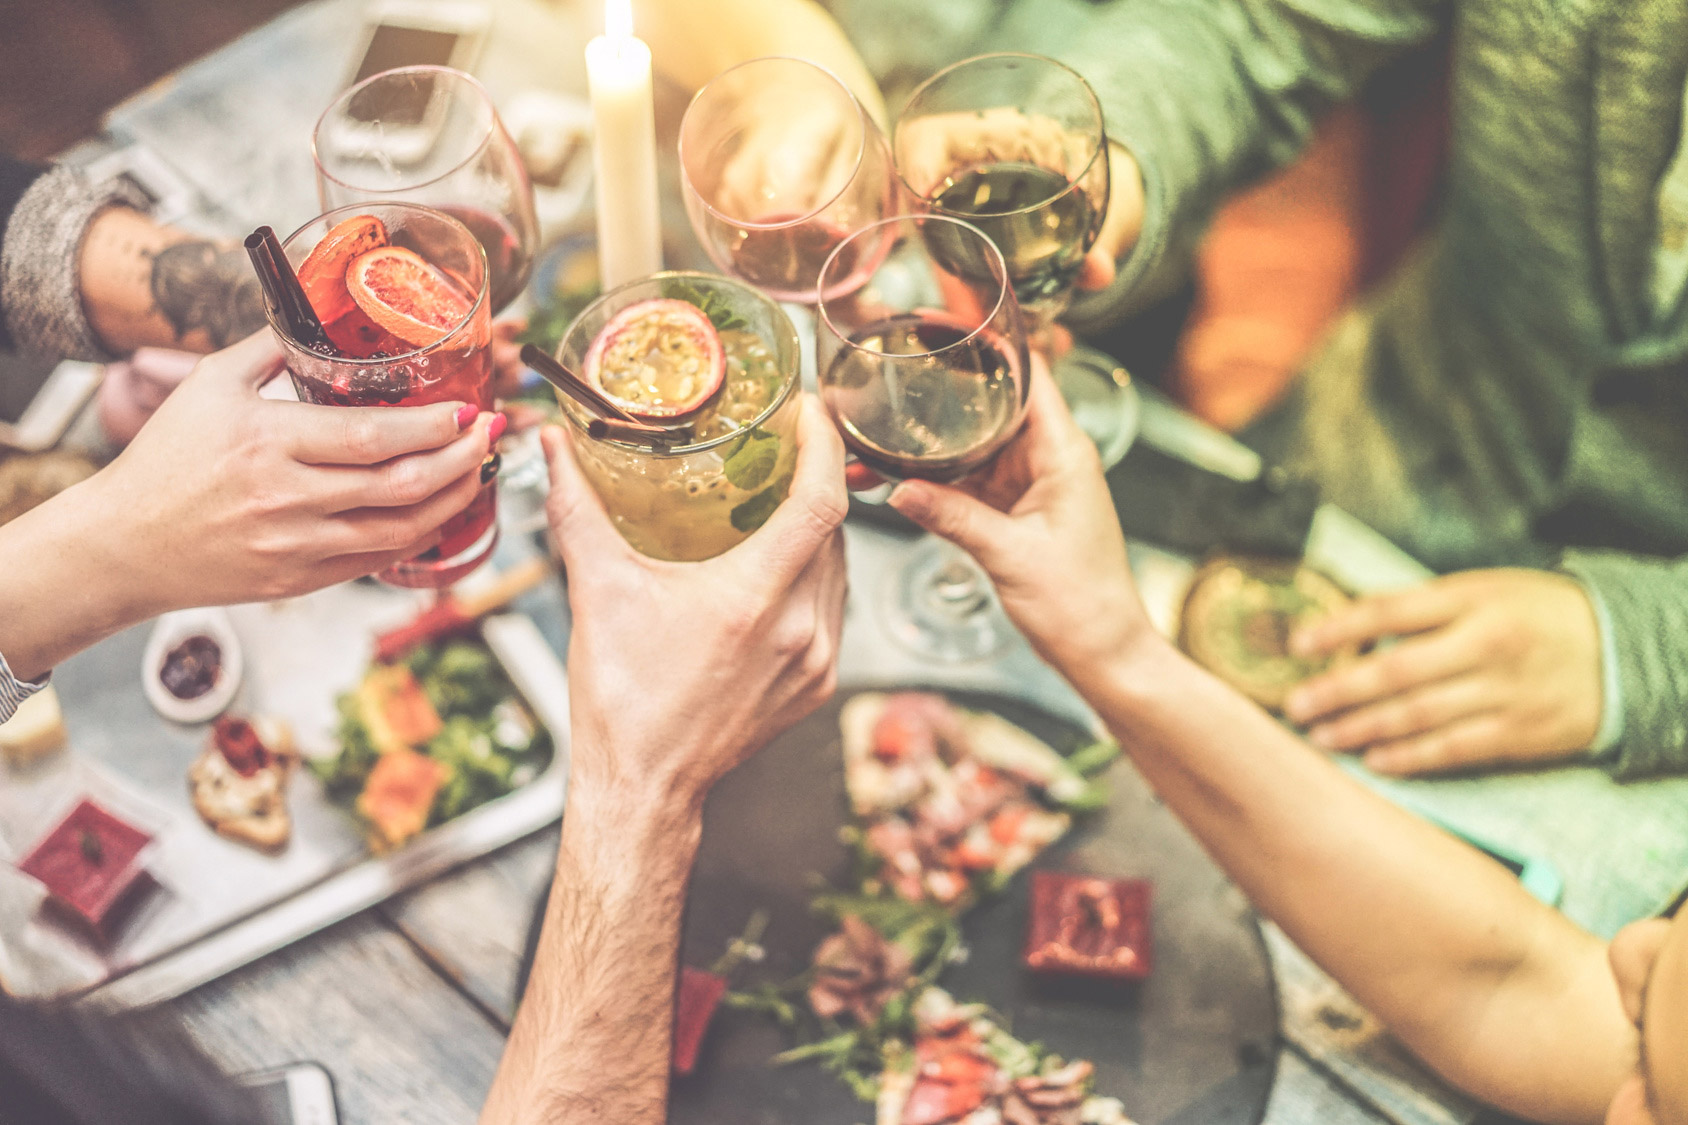 Six people are cheering together with cocktails and wines over a table with food